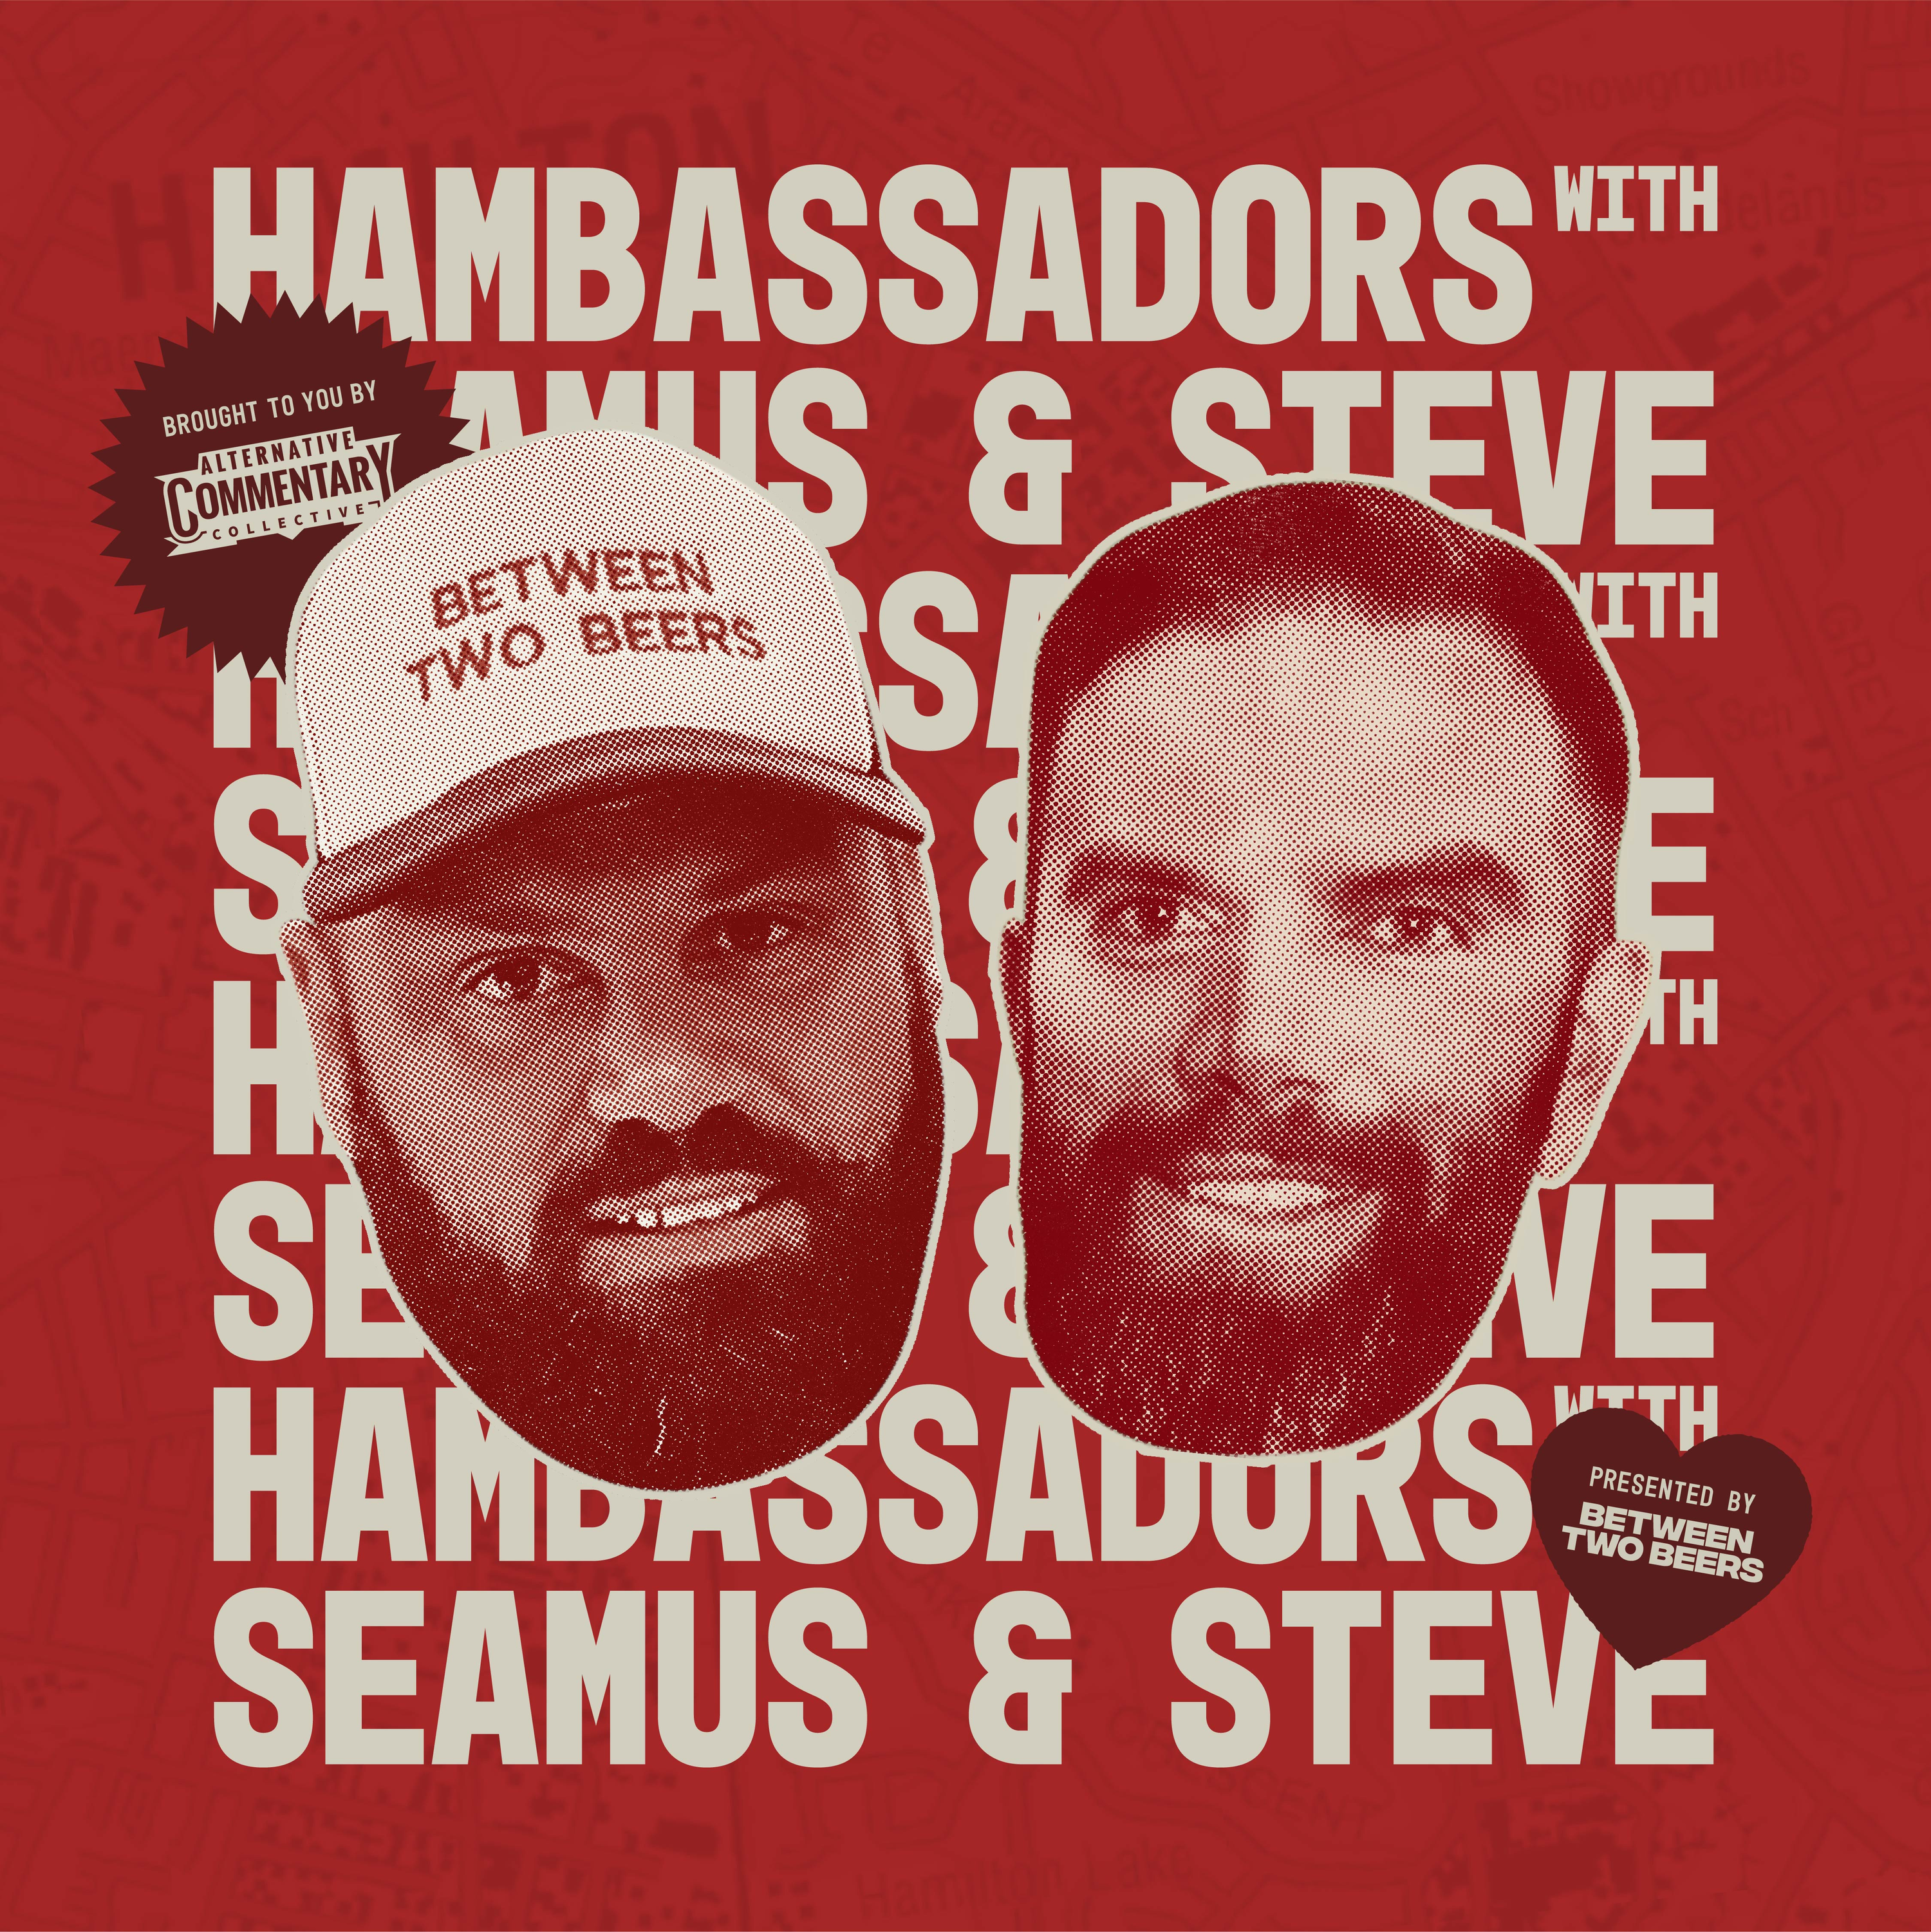 HAMBASSADORS #2: Steve Gets Scammed, Out-Celeb’ing Brodie Kane, Which Guests are Mates?